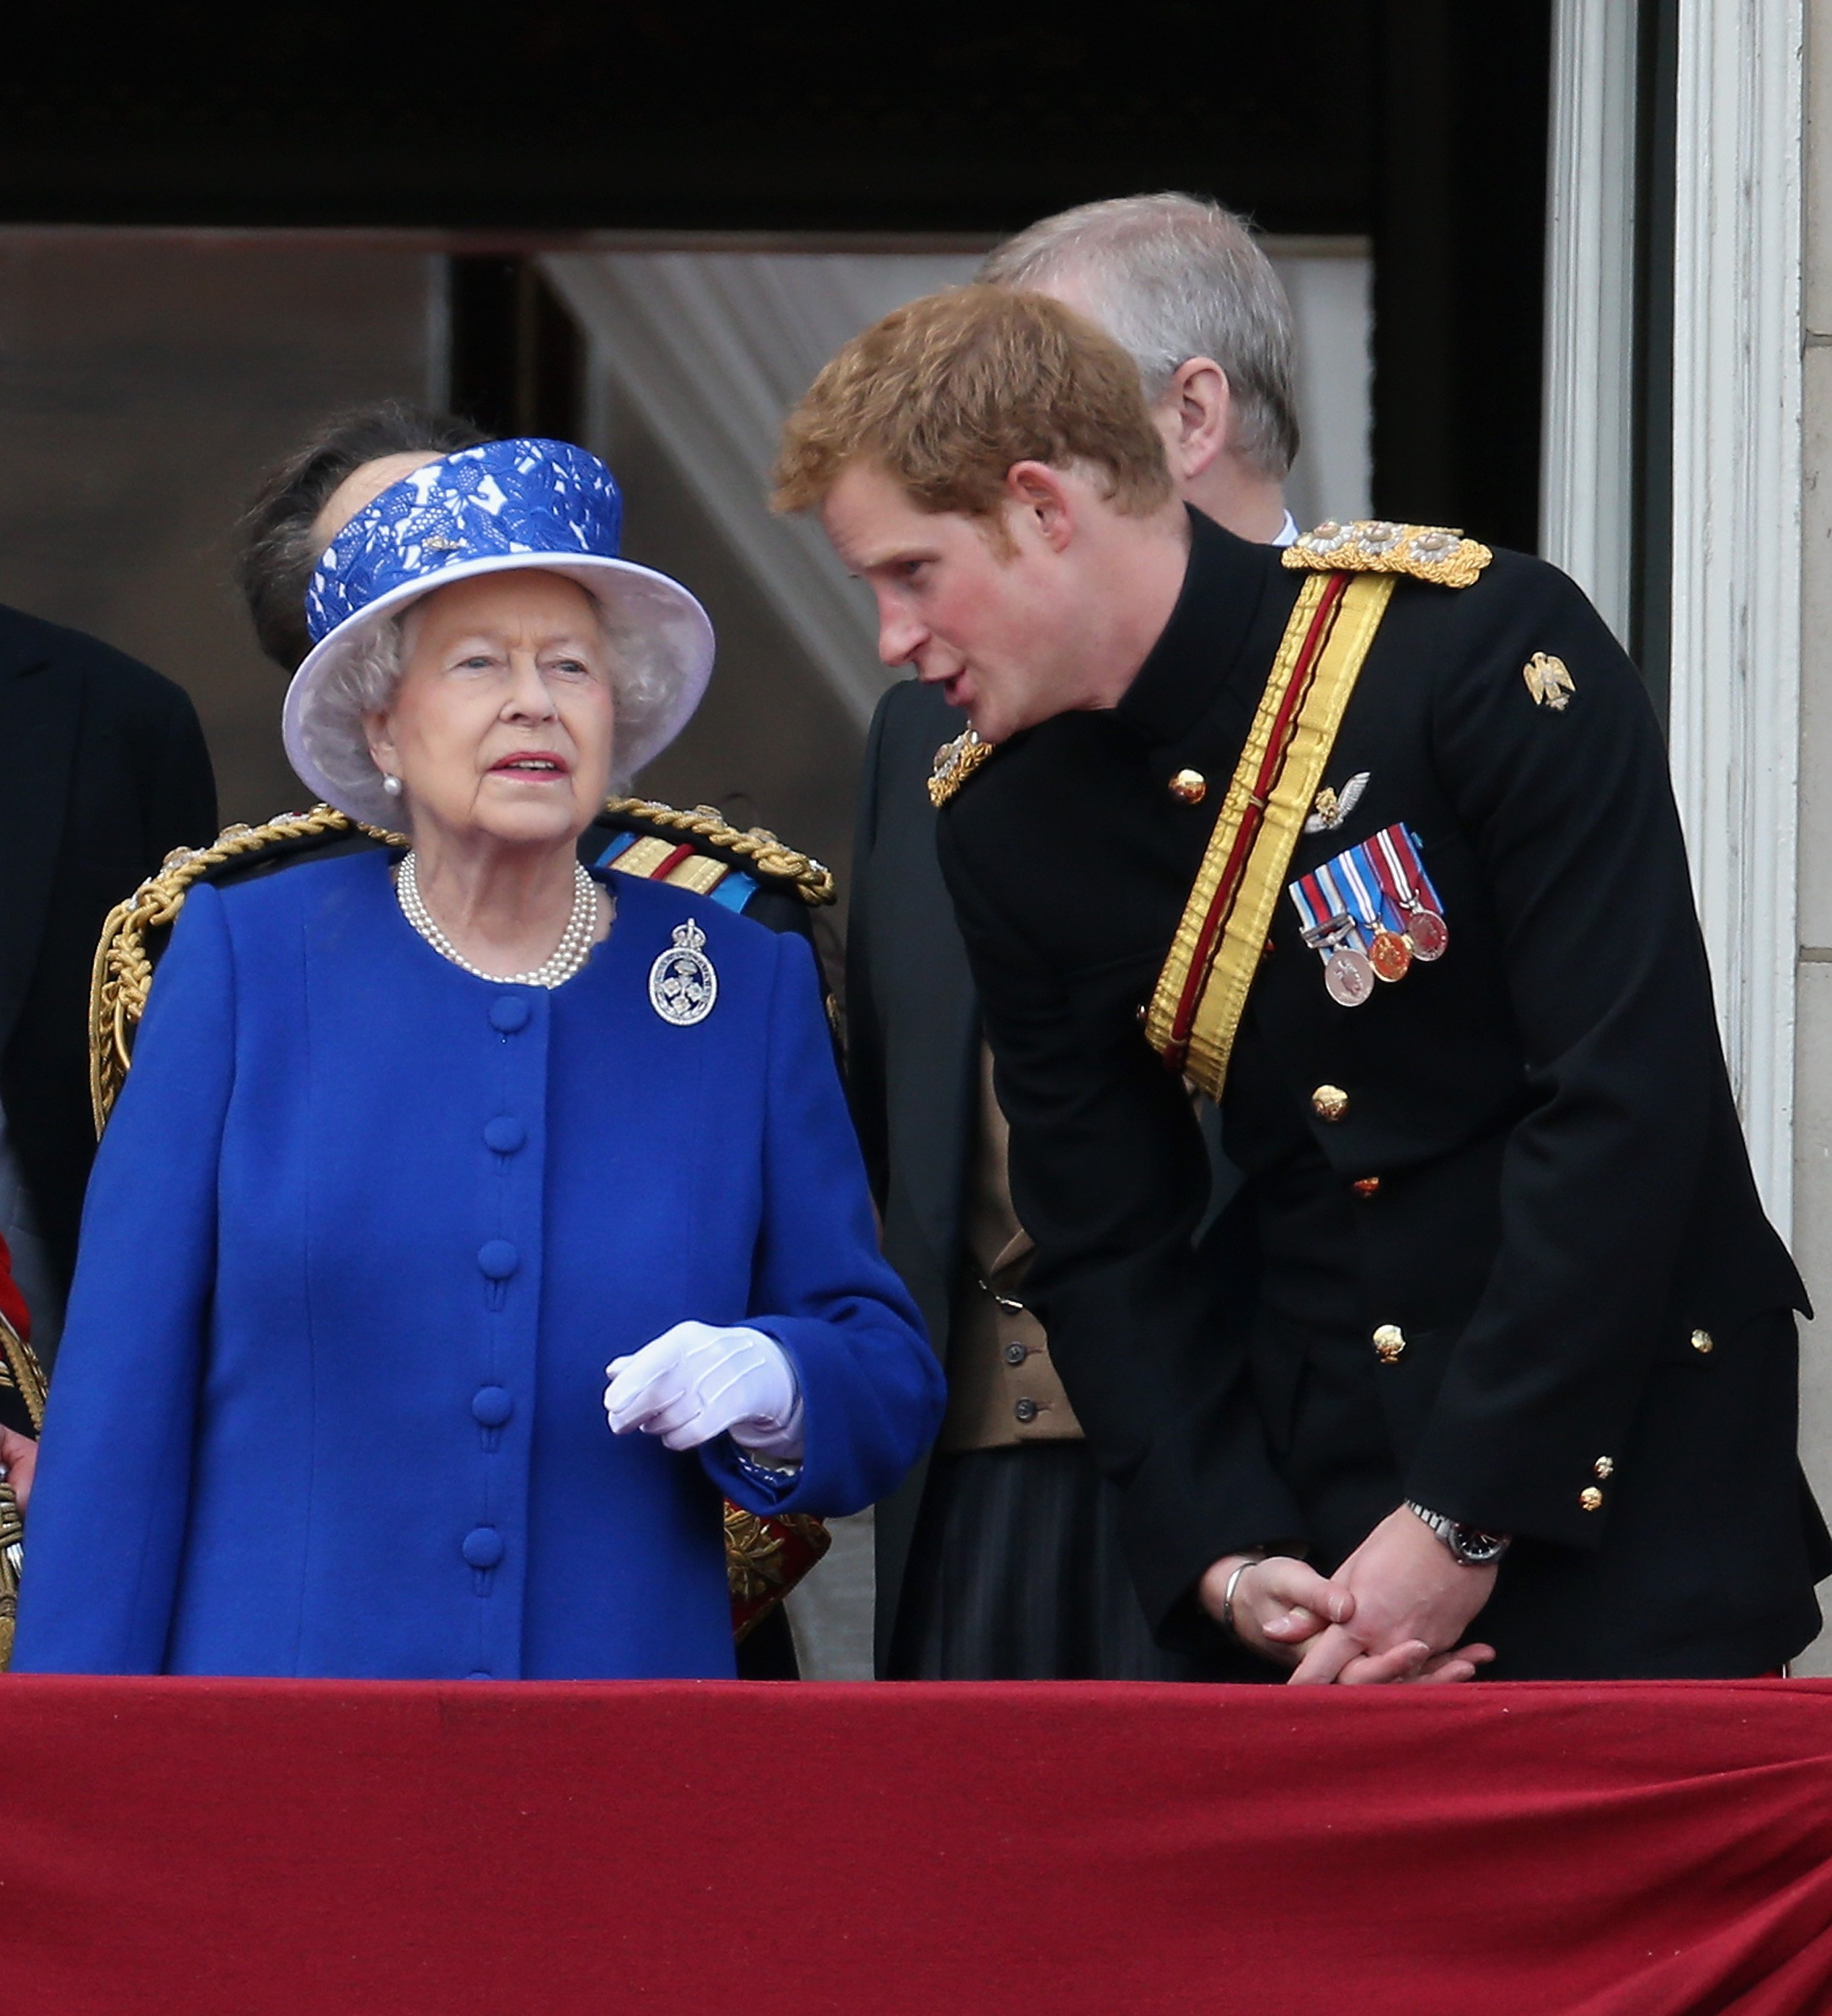 Prince Harry chats to Queen Elizabeth II on the balcony of Buckingham Palace during the annual Trooping the Colour Ceremony on June 15, 2013 in London, England. | Source: Getty Images